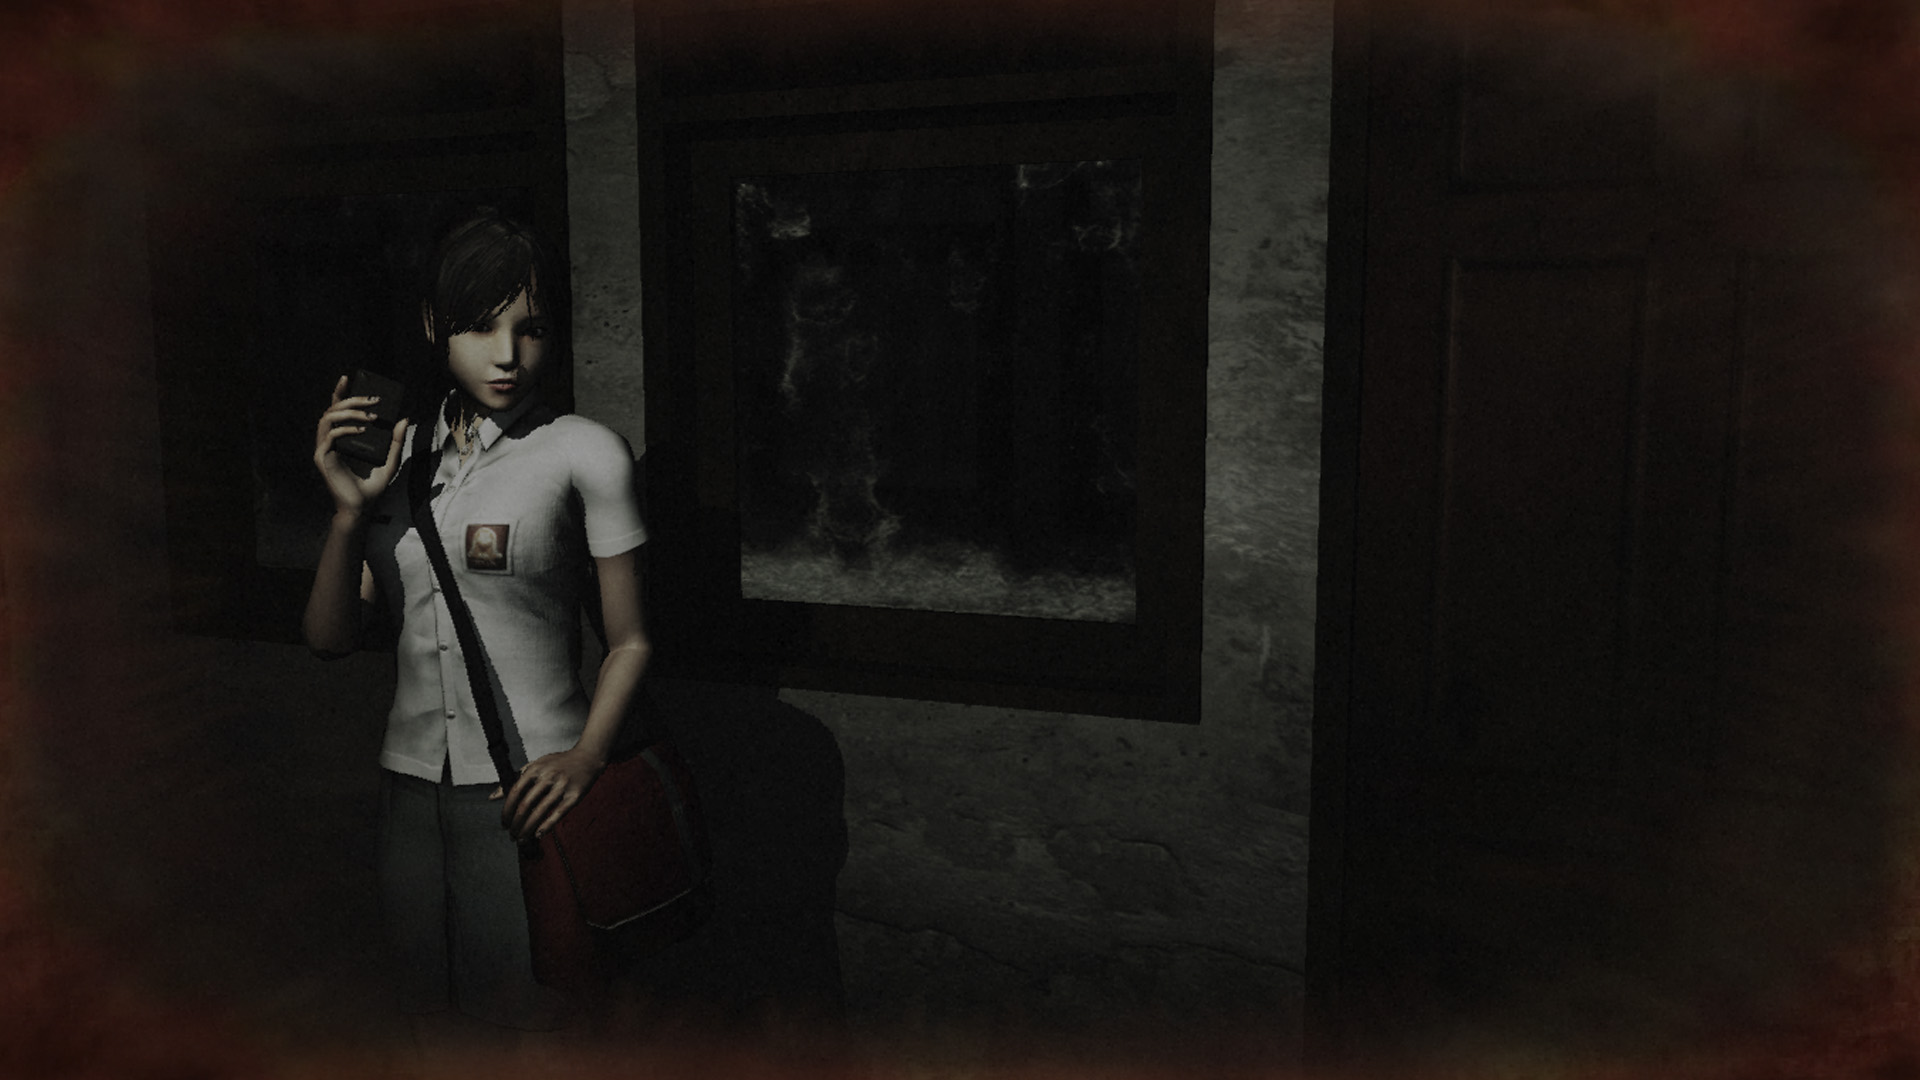 download game dreadout